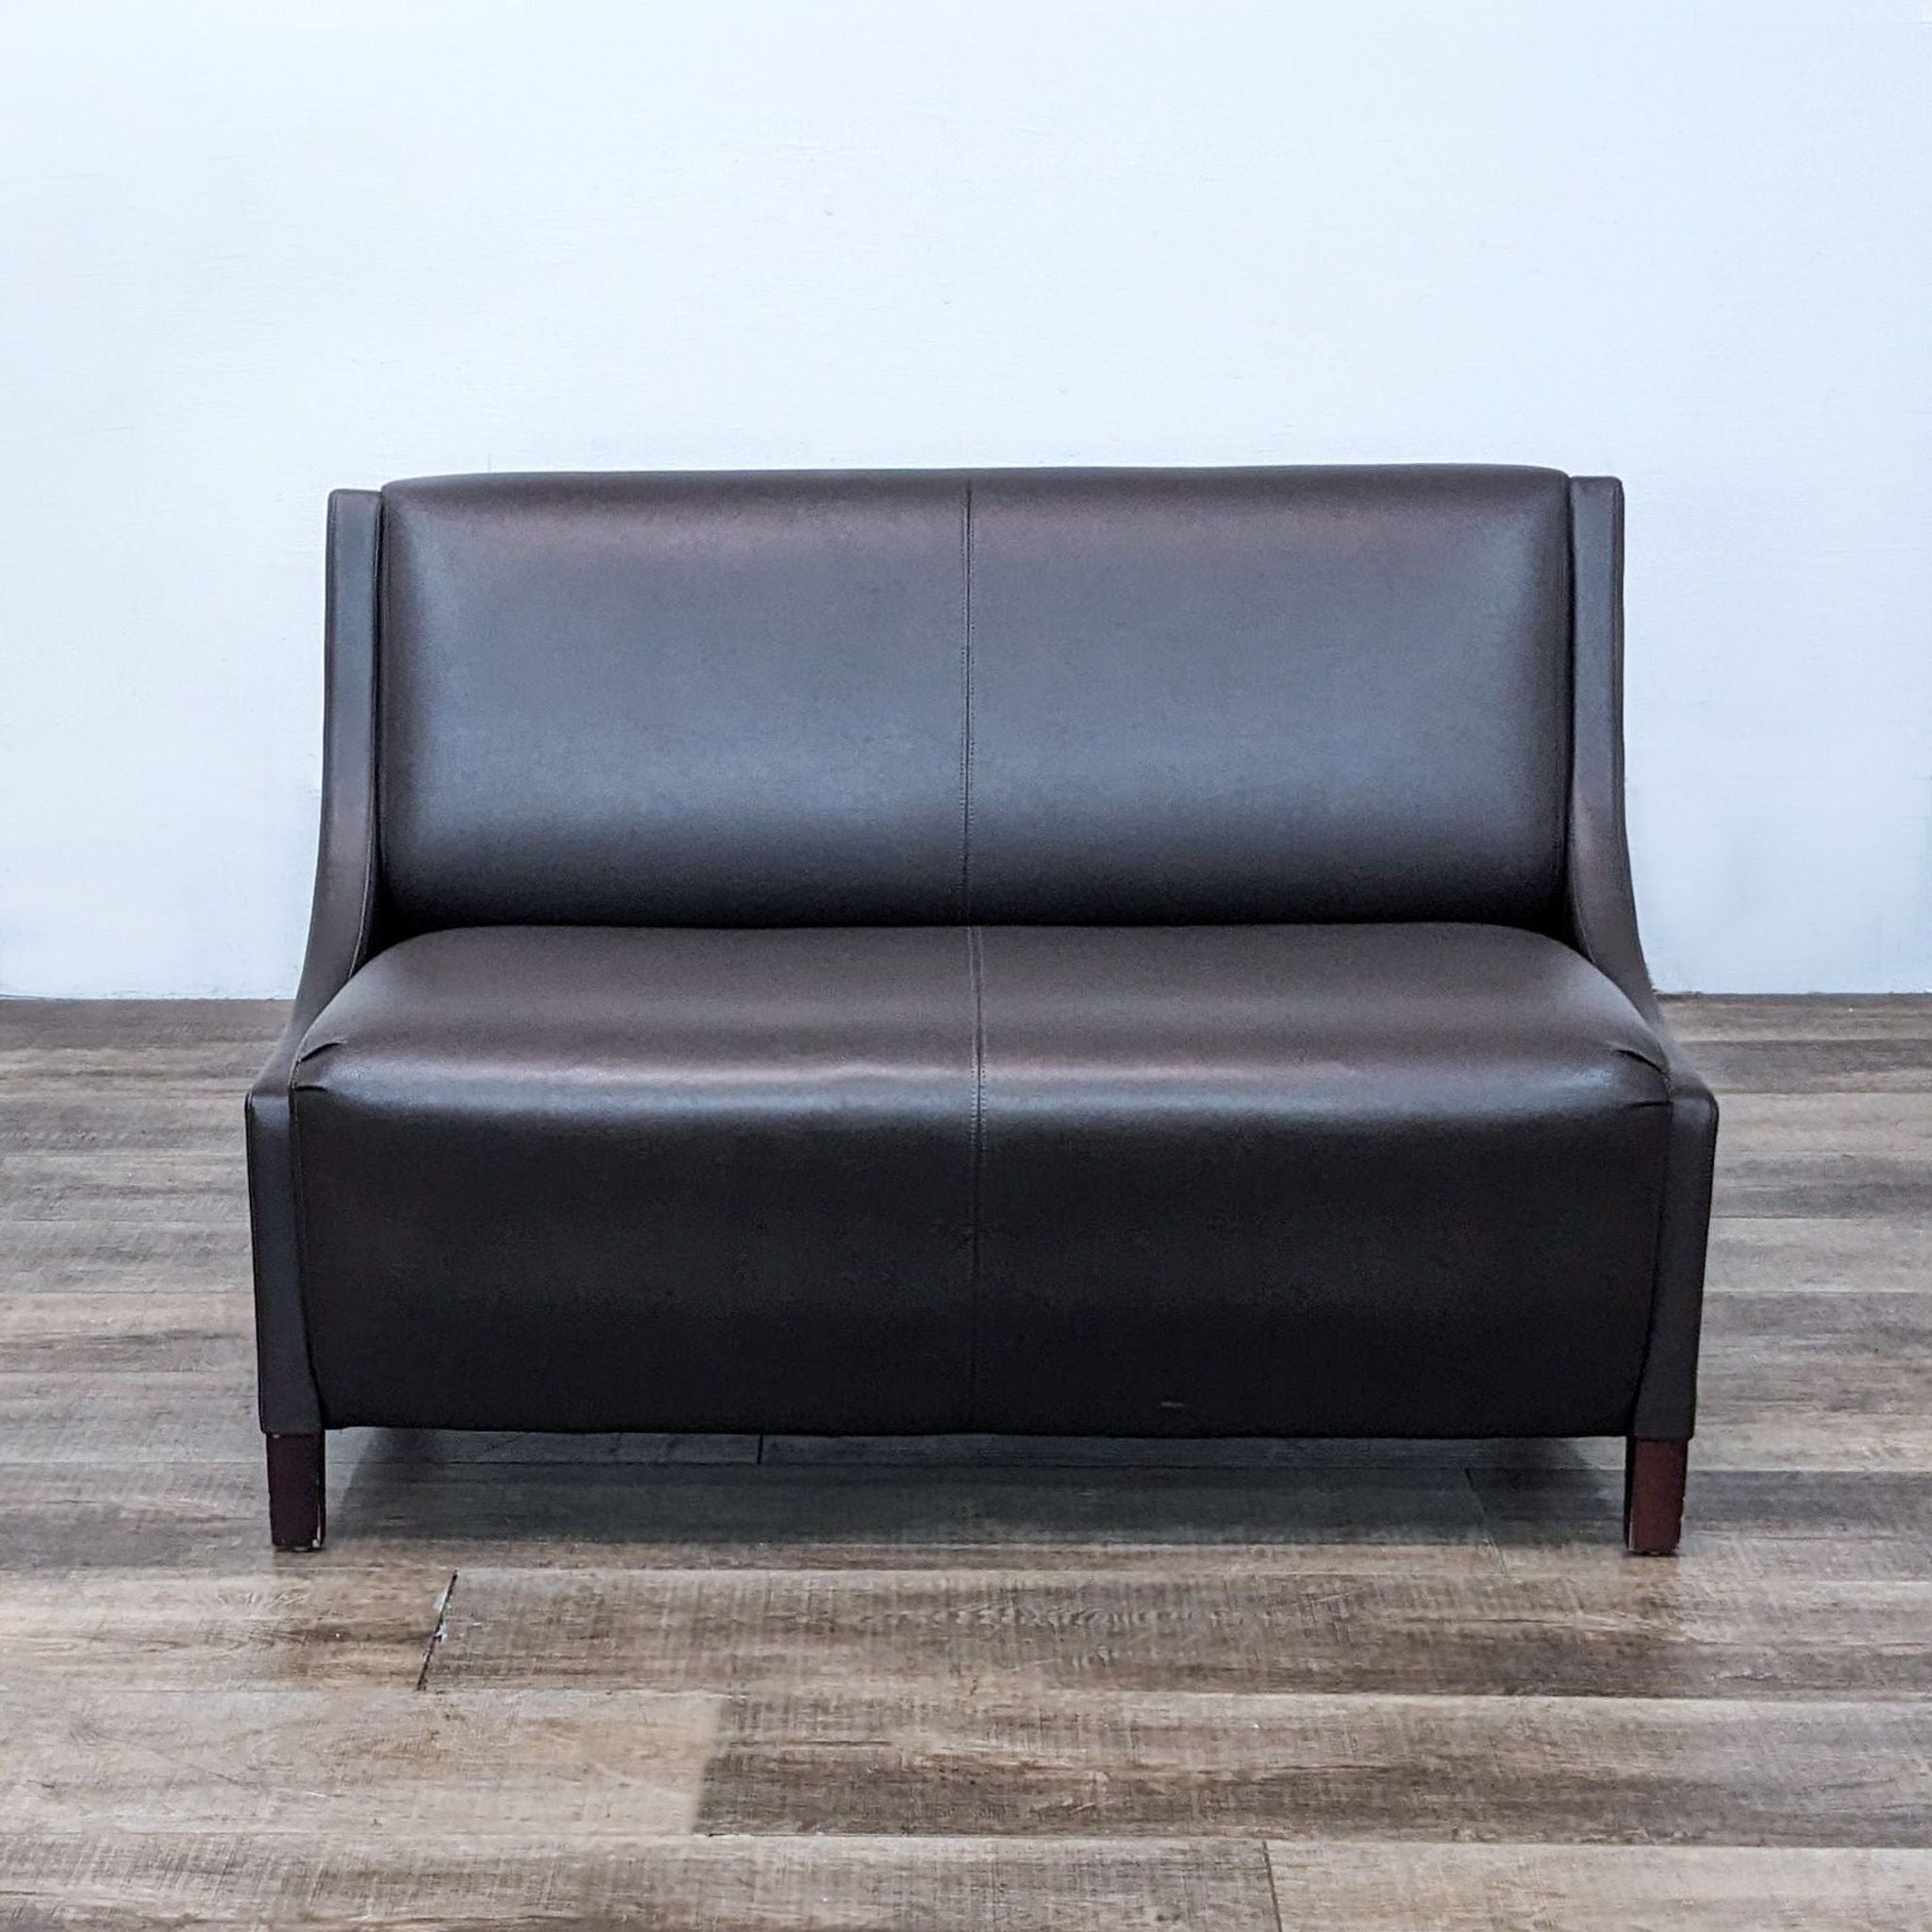 Reperch brown leather-look loveseat with clean lines and dark wood feet, positioned on a wooden floor.